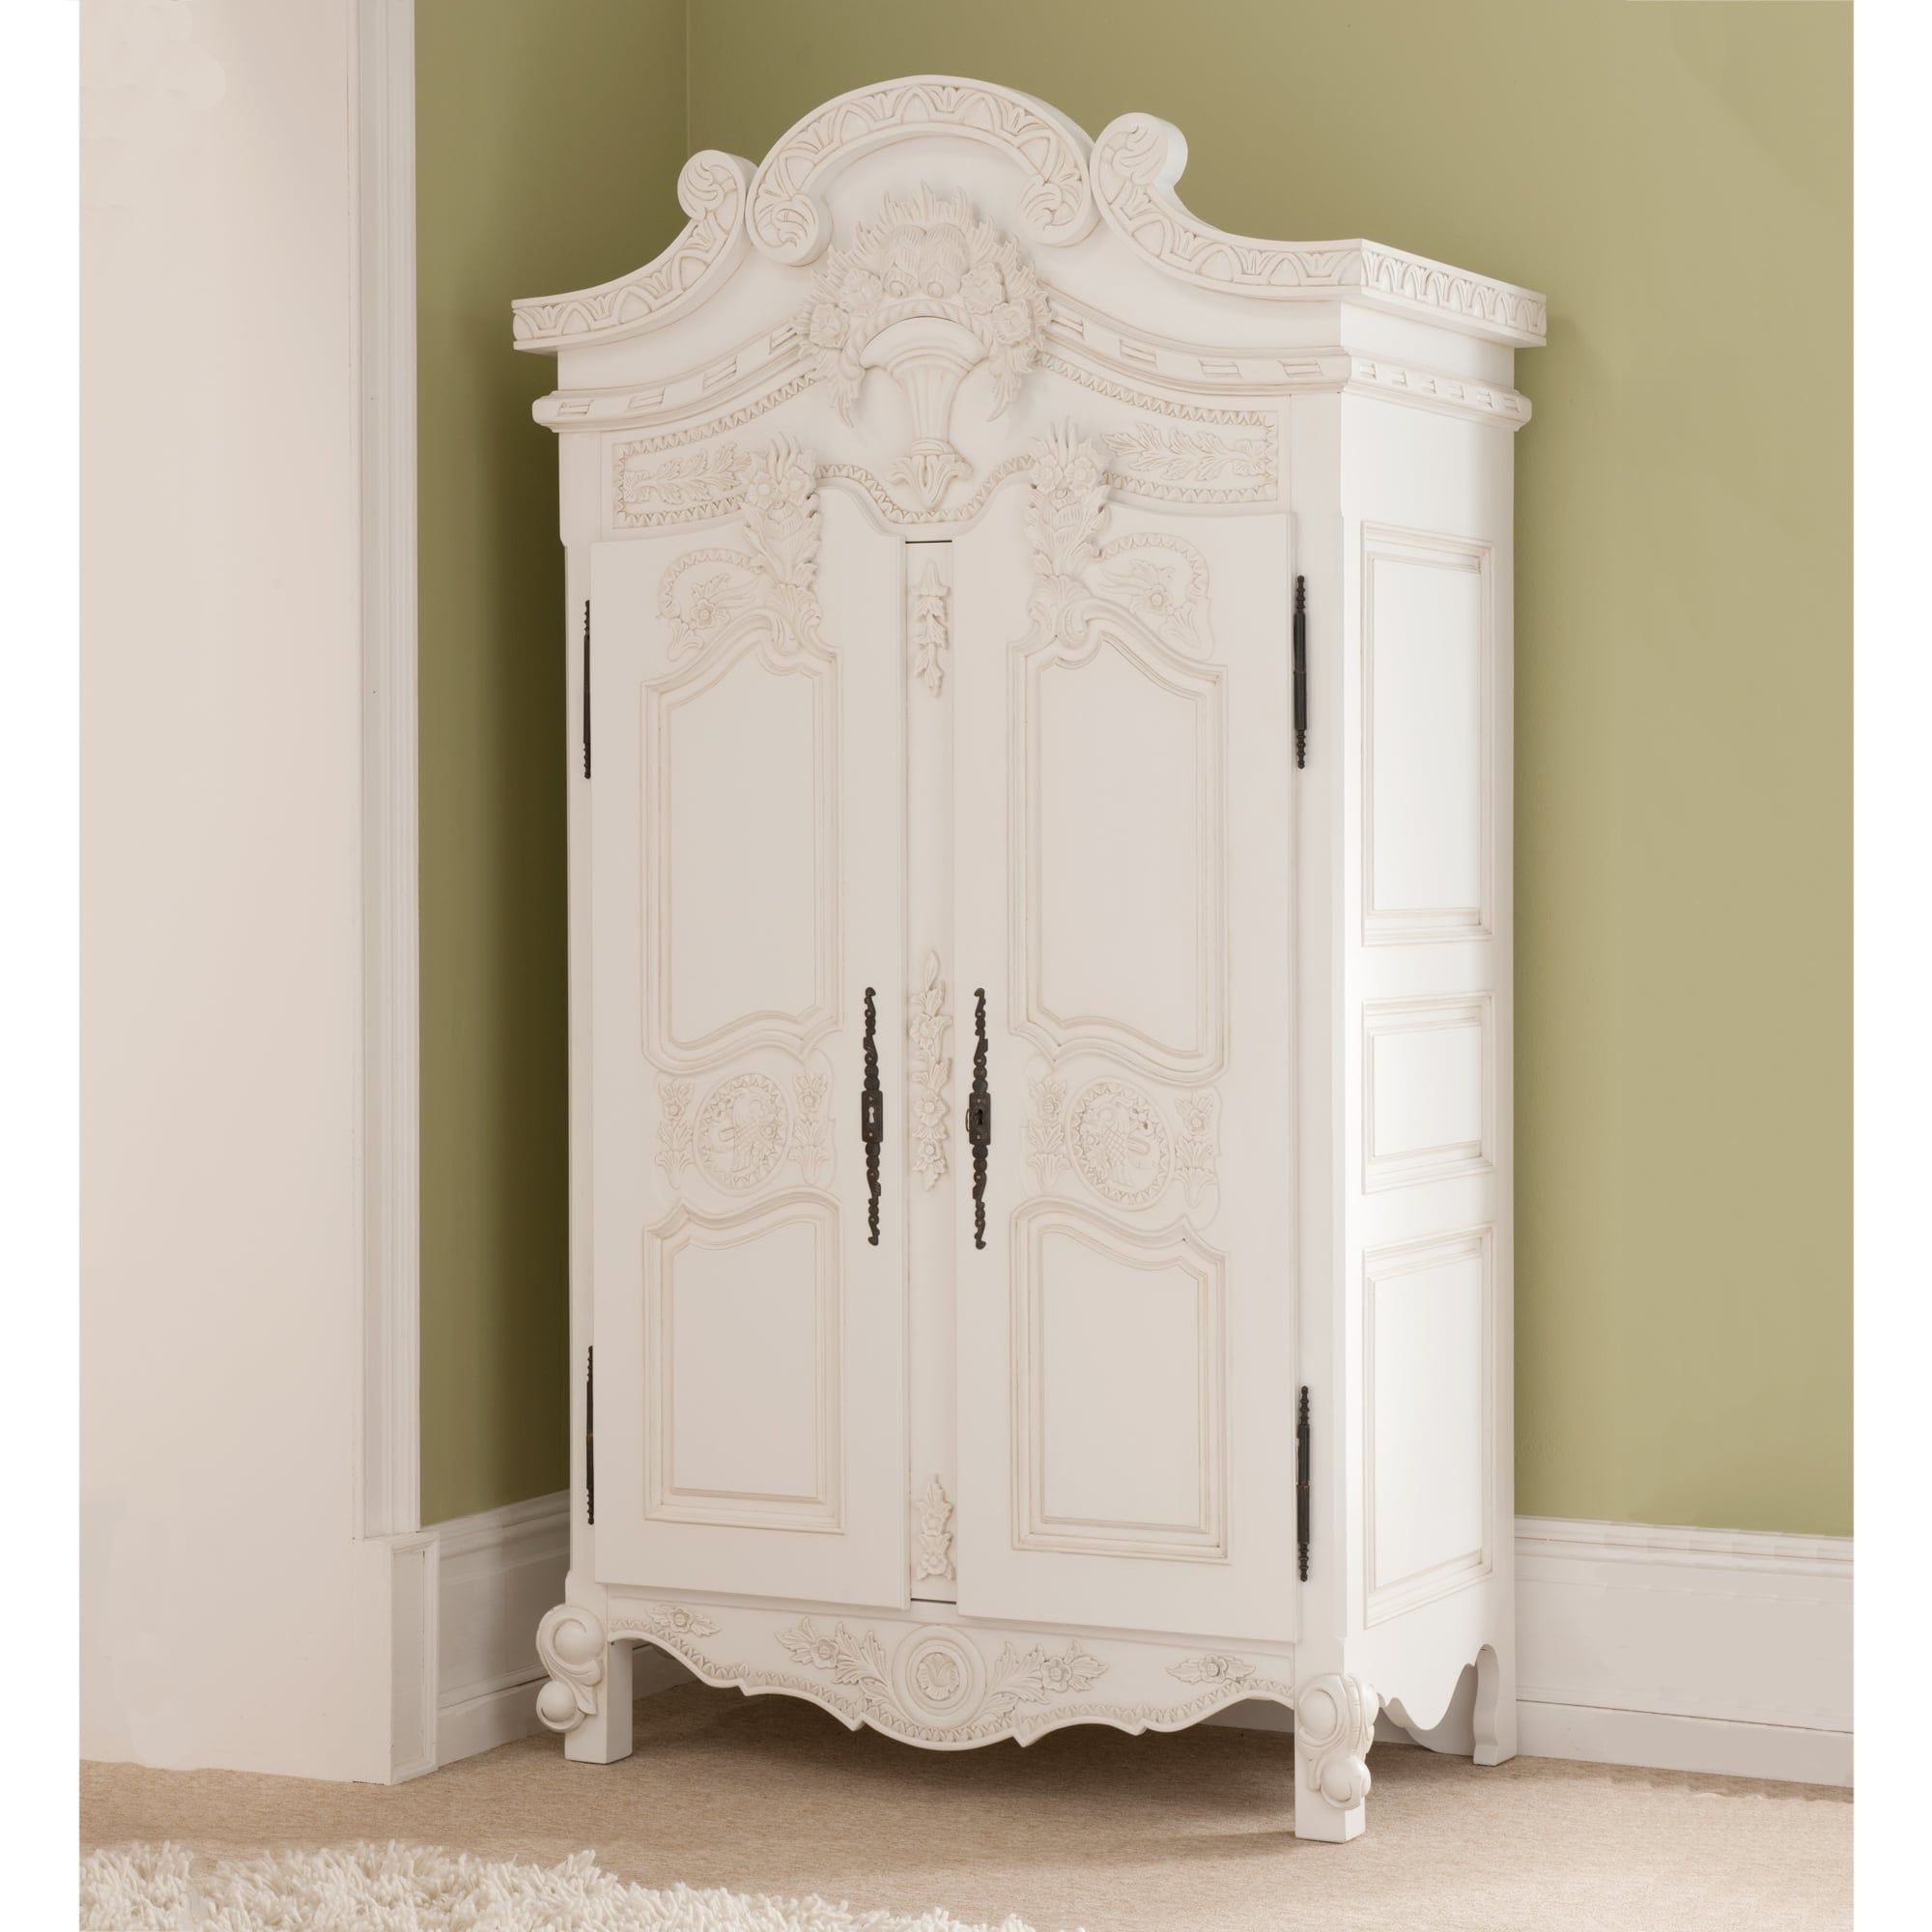 Rococo Antique French Style Wardrobe | Wooden 2 Door Wardrobes In White French Style Wardrobes (View 10 of 20)